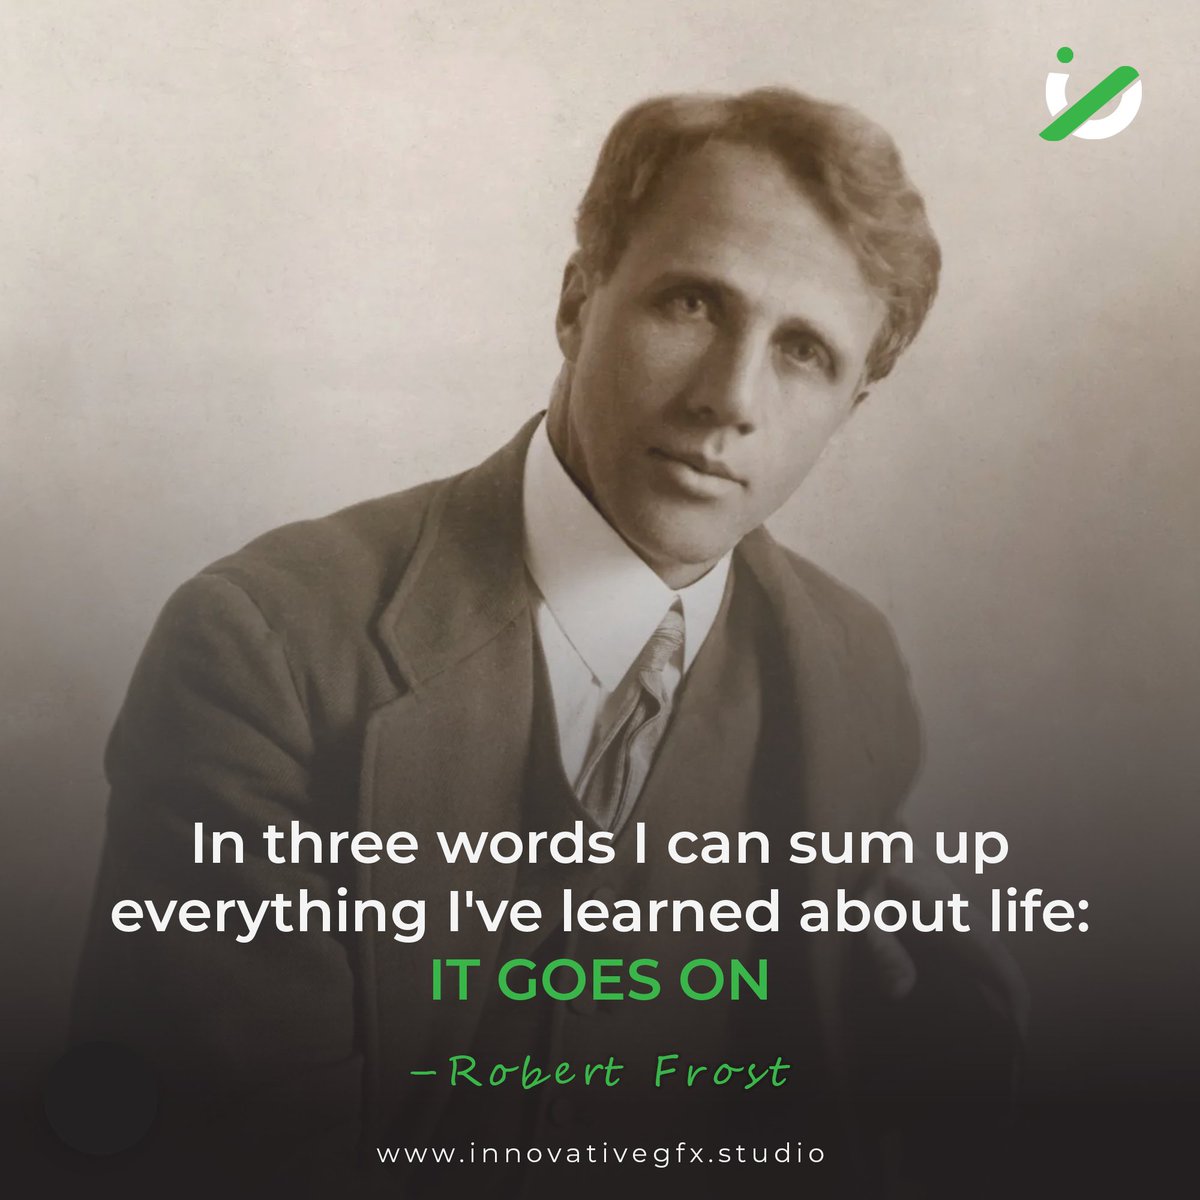 'In three words I can Sum up Everything I've learned about life IT Goes ON.' #Motivational Life #Quote by Robert Frost #InnovativeGFX #InspirationalWords #LifeGoesOn #QuoteDesign #InspirationForTheDay #PositiveVibesOnly